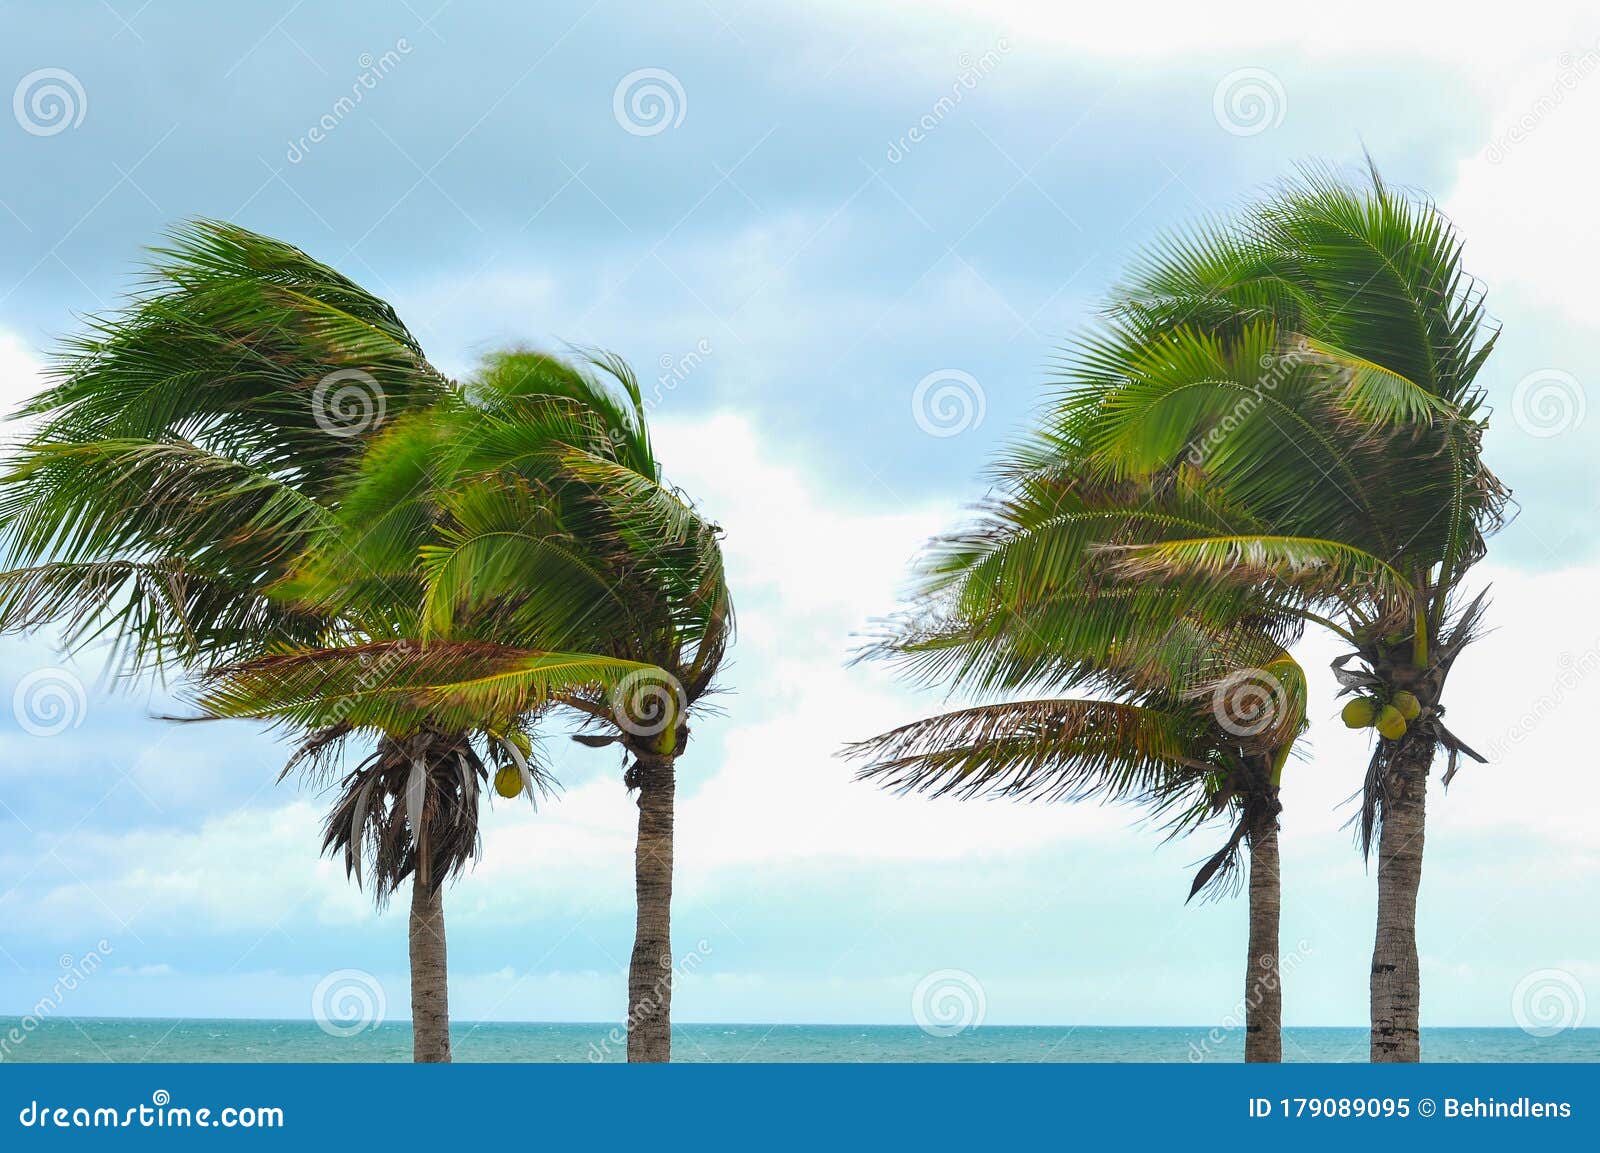 palm tree at hurricane windstorm. strong wind make palm leaf heavy blow follow wind direction